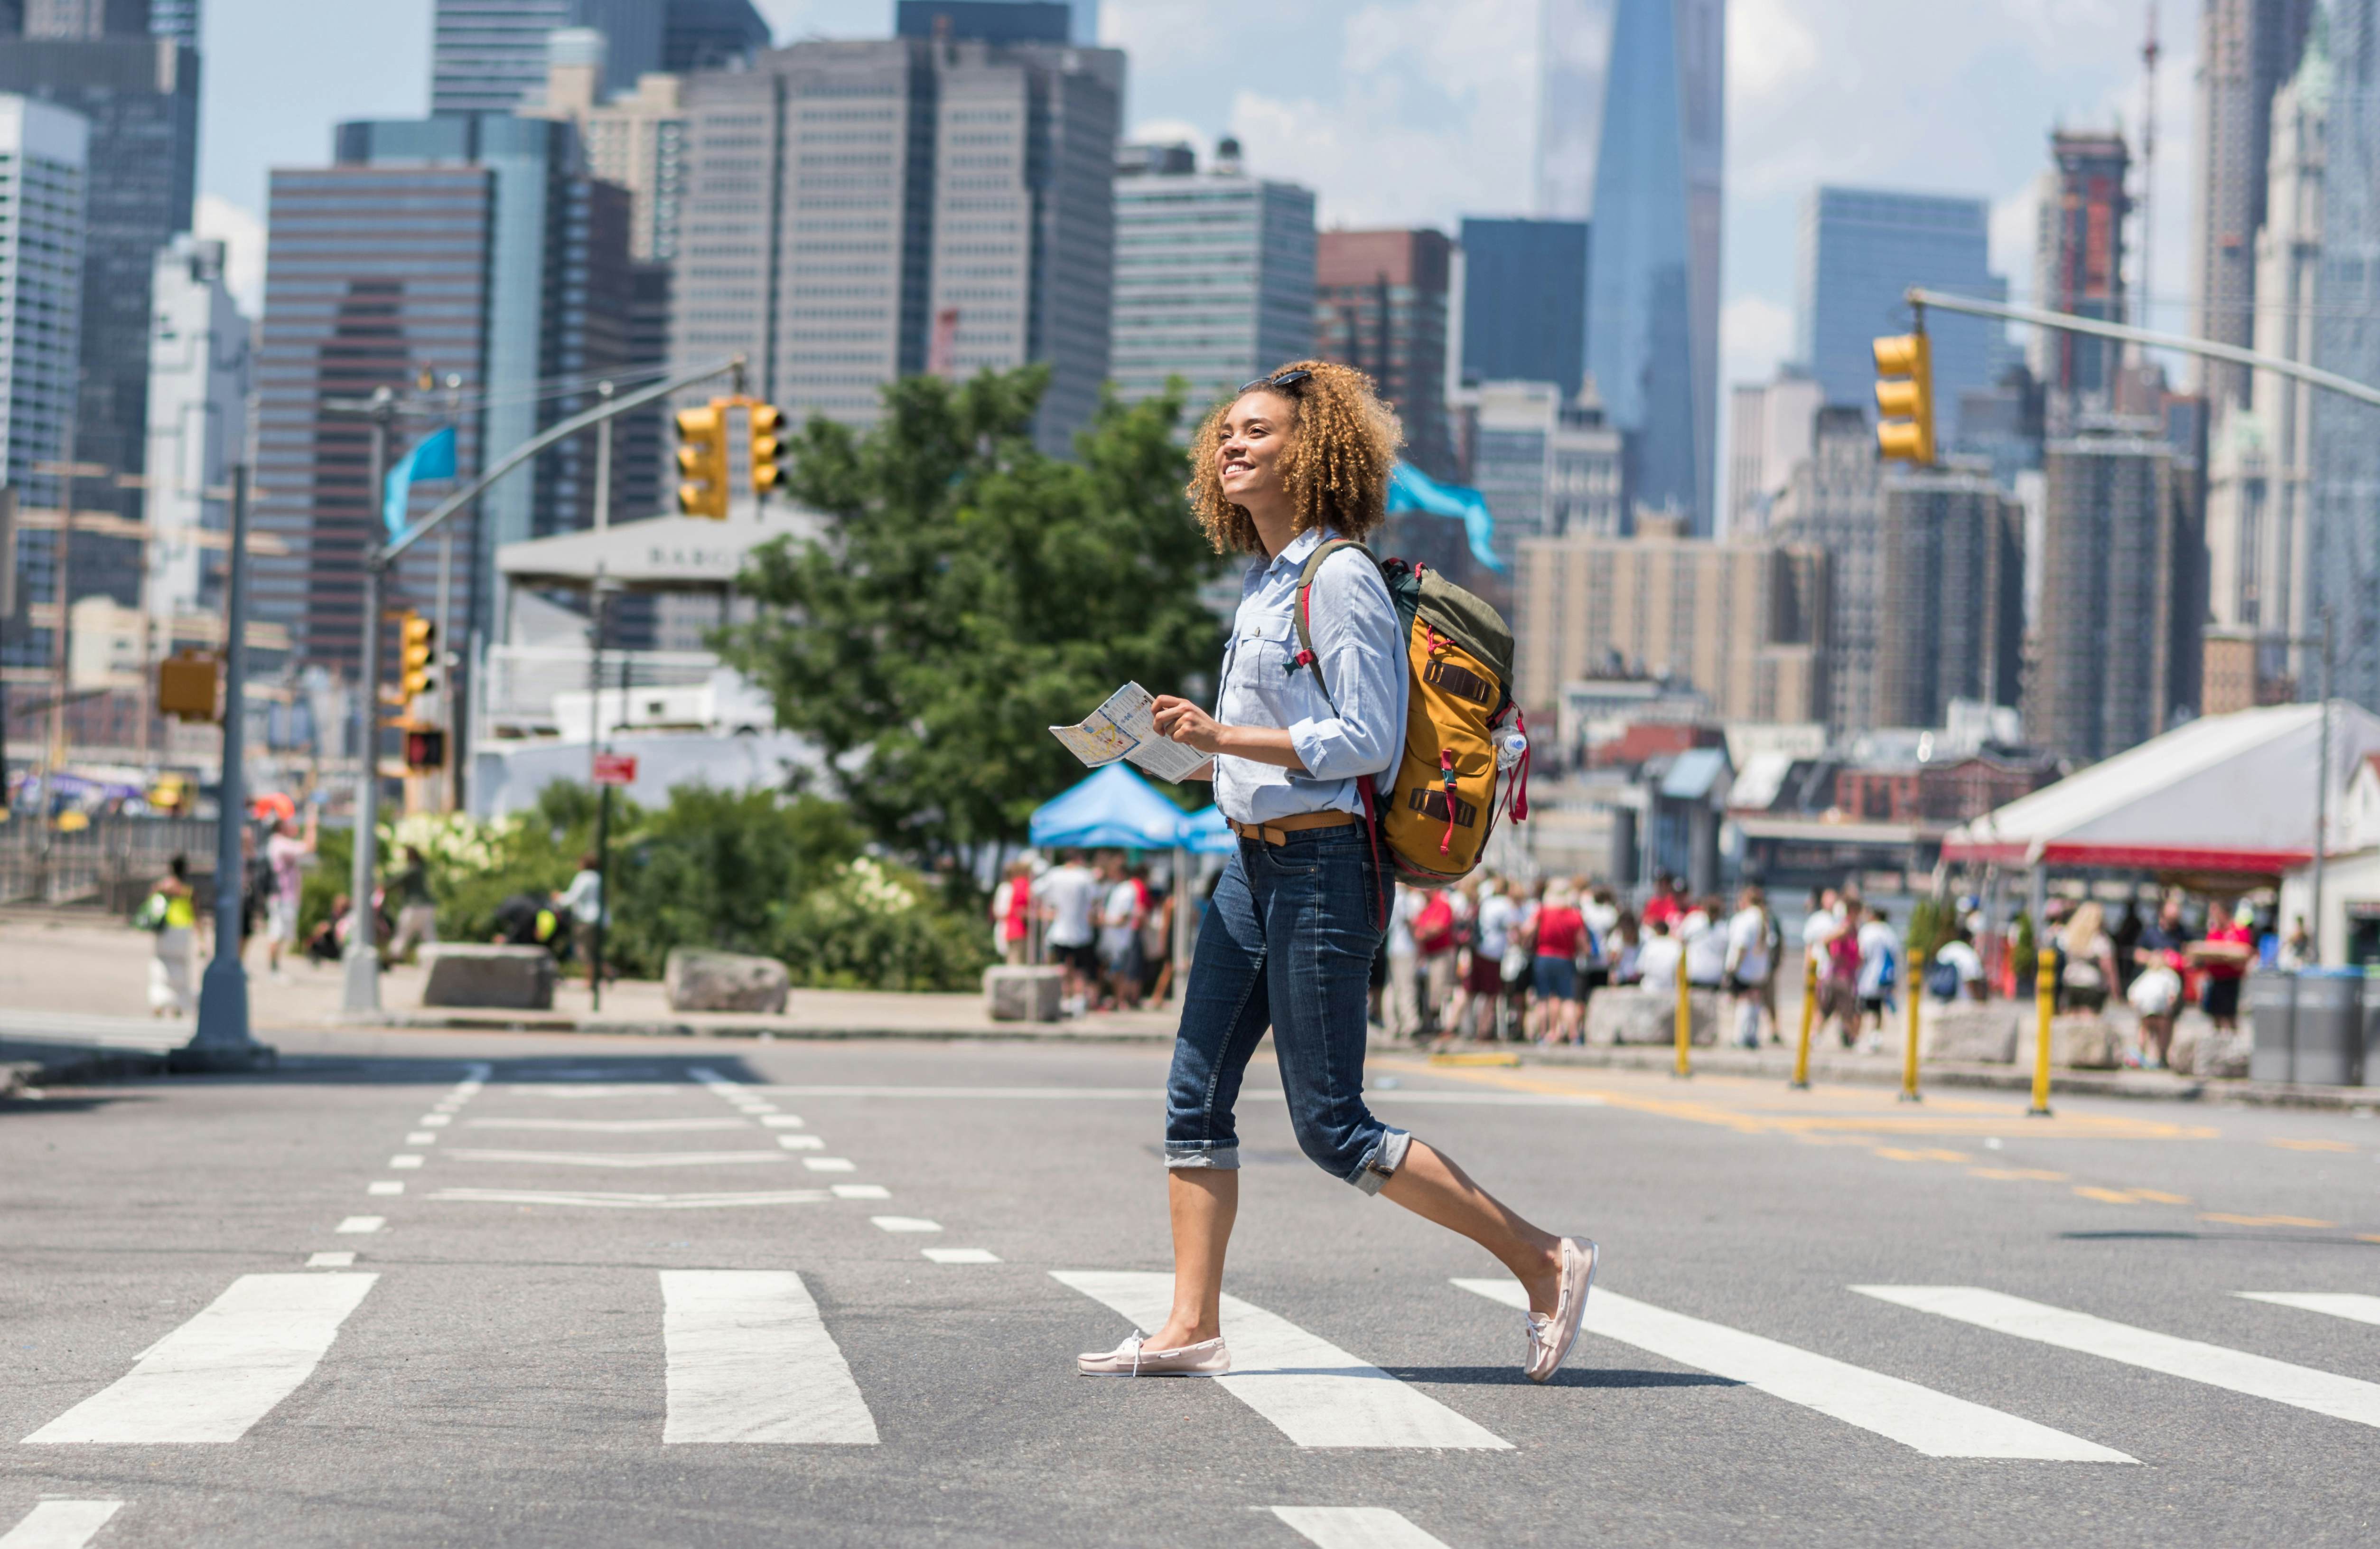 10 best neighborhoods to shop in NYC – Lonely Planet - Lonely Planet